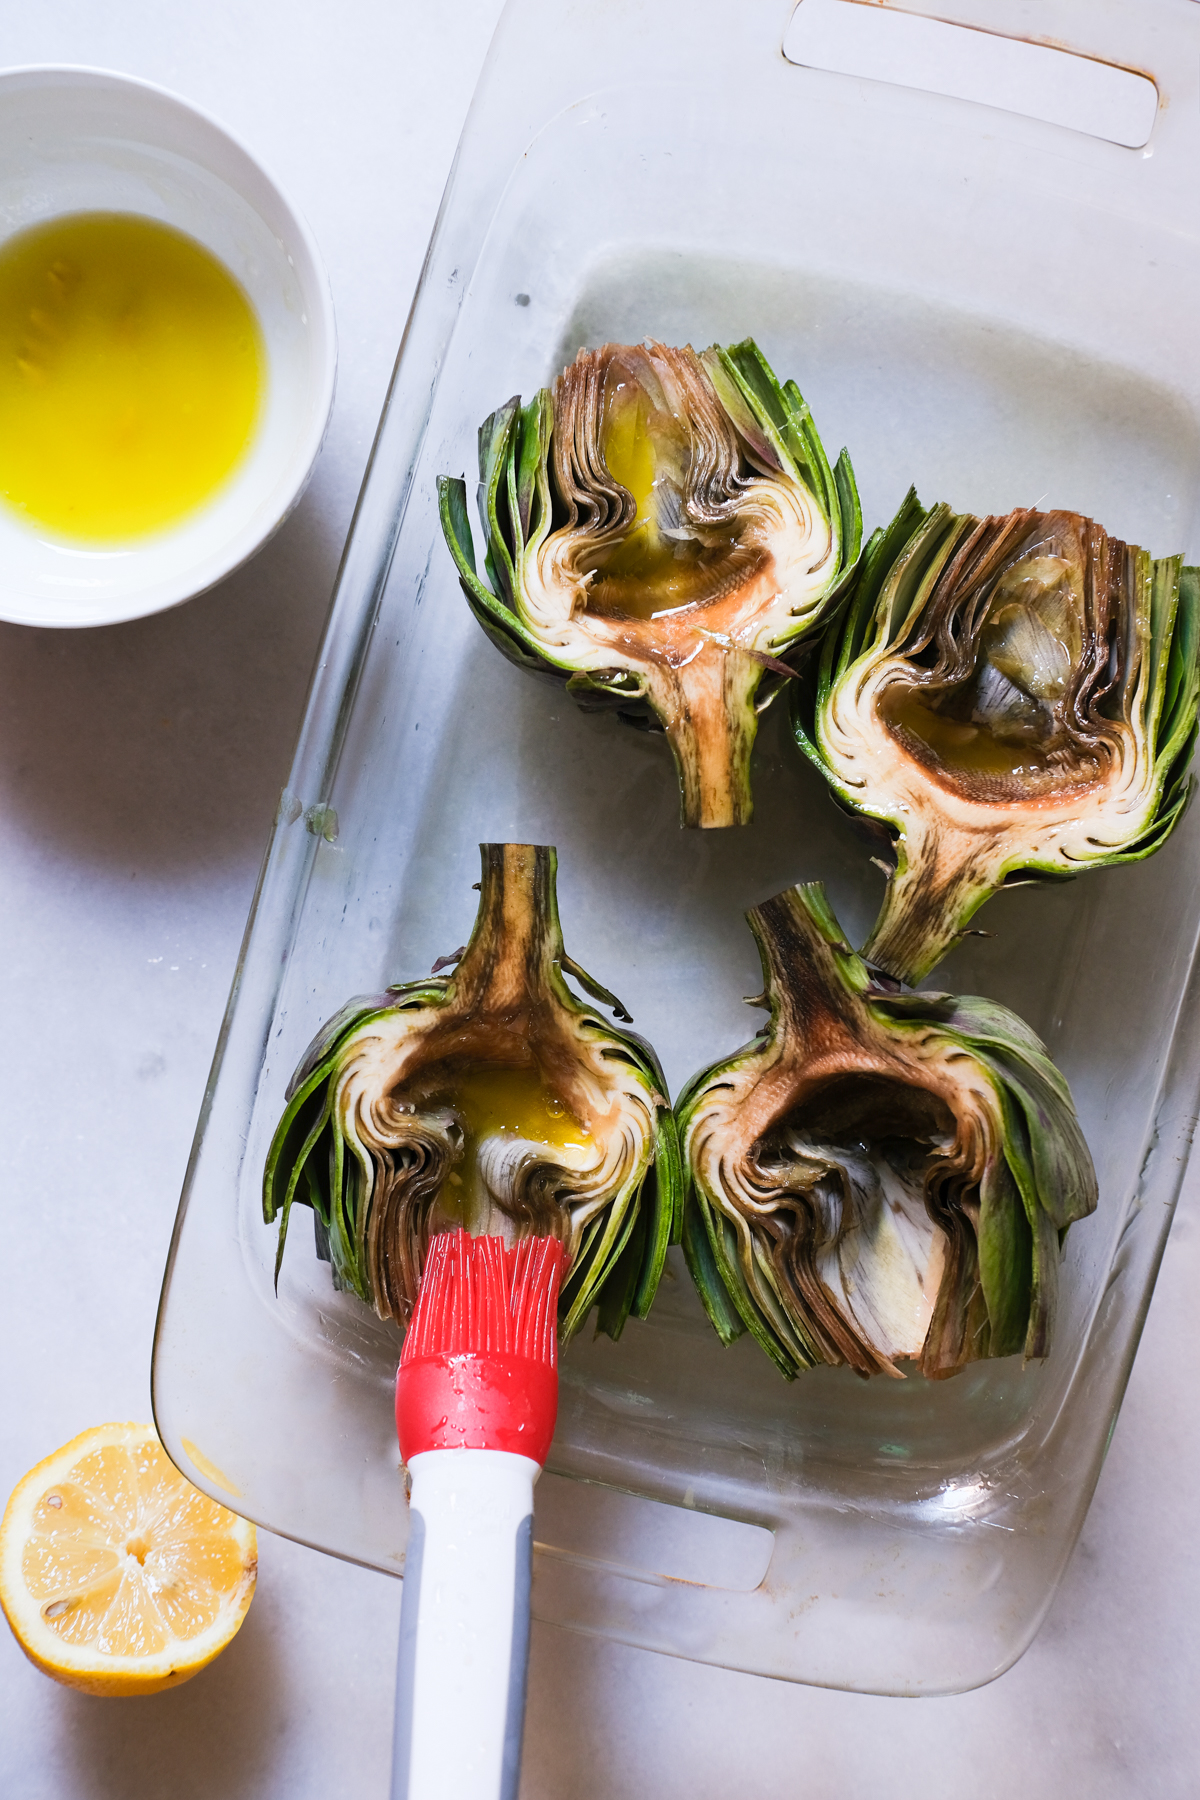 brushing artichokes with lemon and water